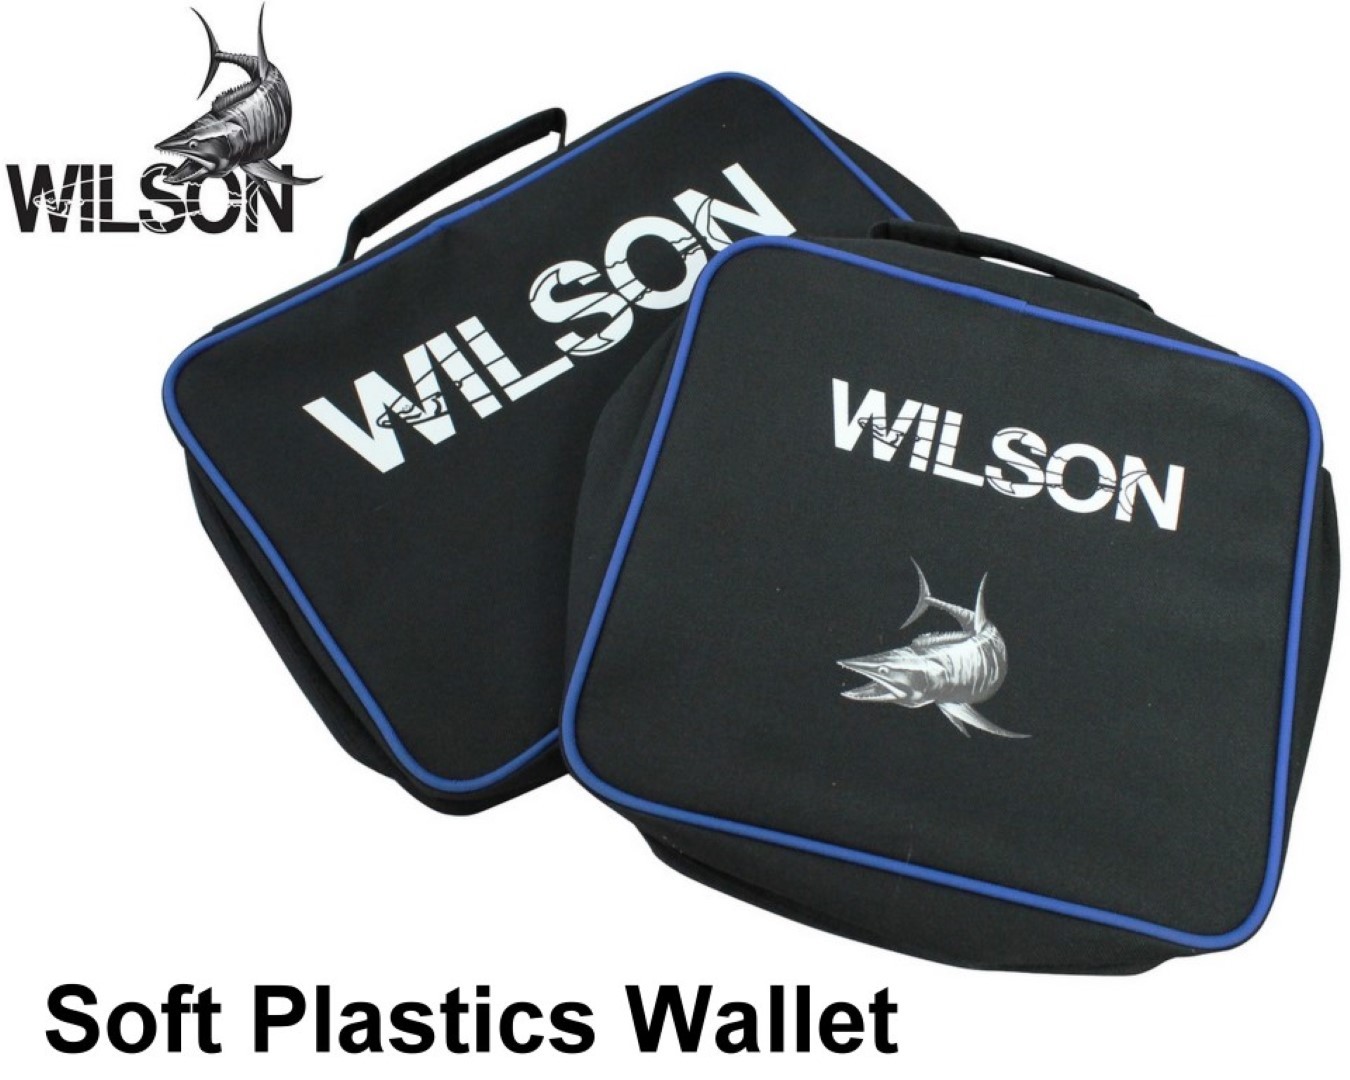 1 x Wilson Fishing Lure Wallet - Soft Plastics Wallet-Large or Small-Choose  Size